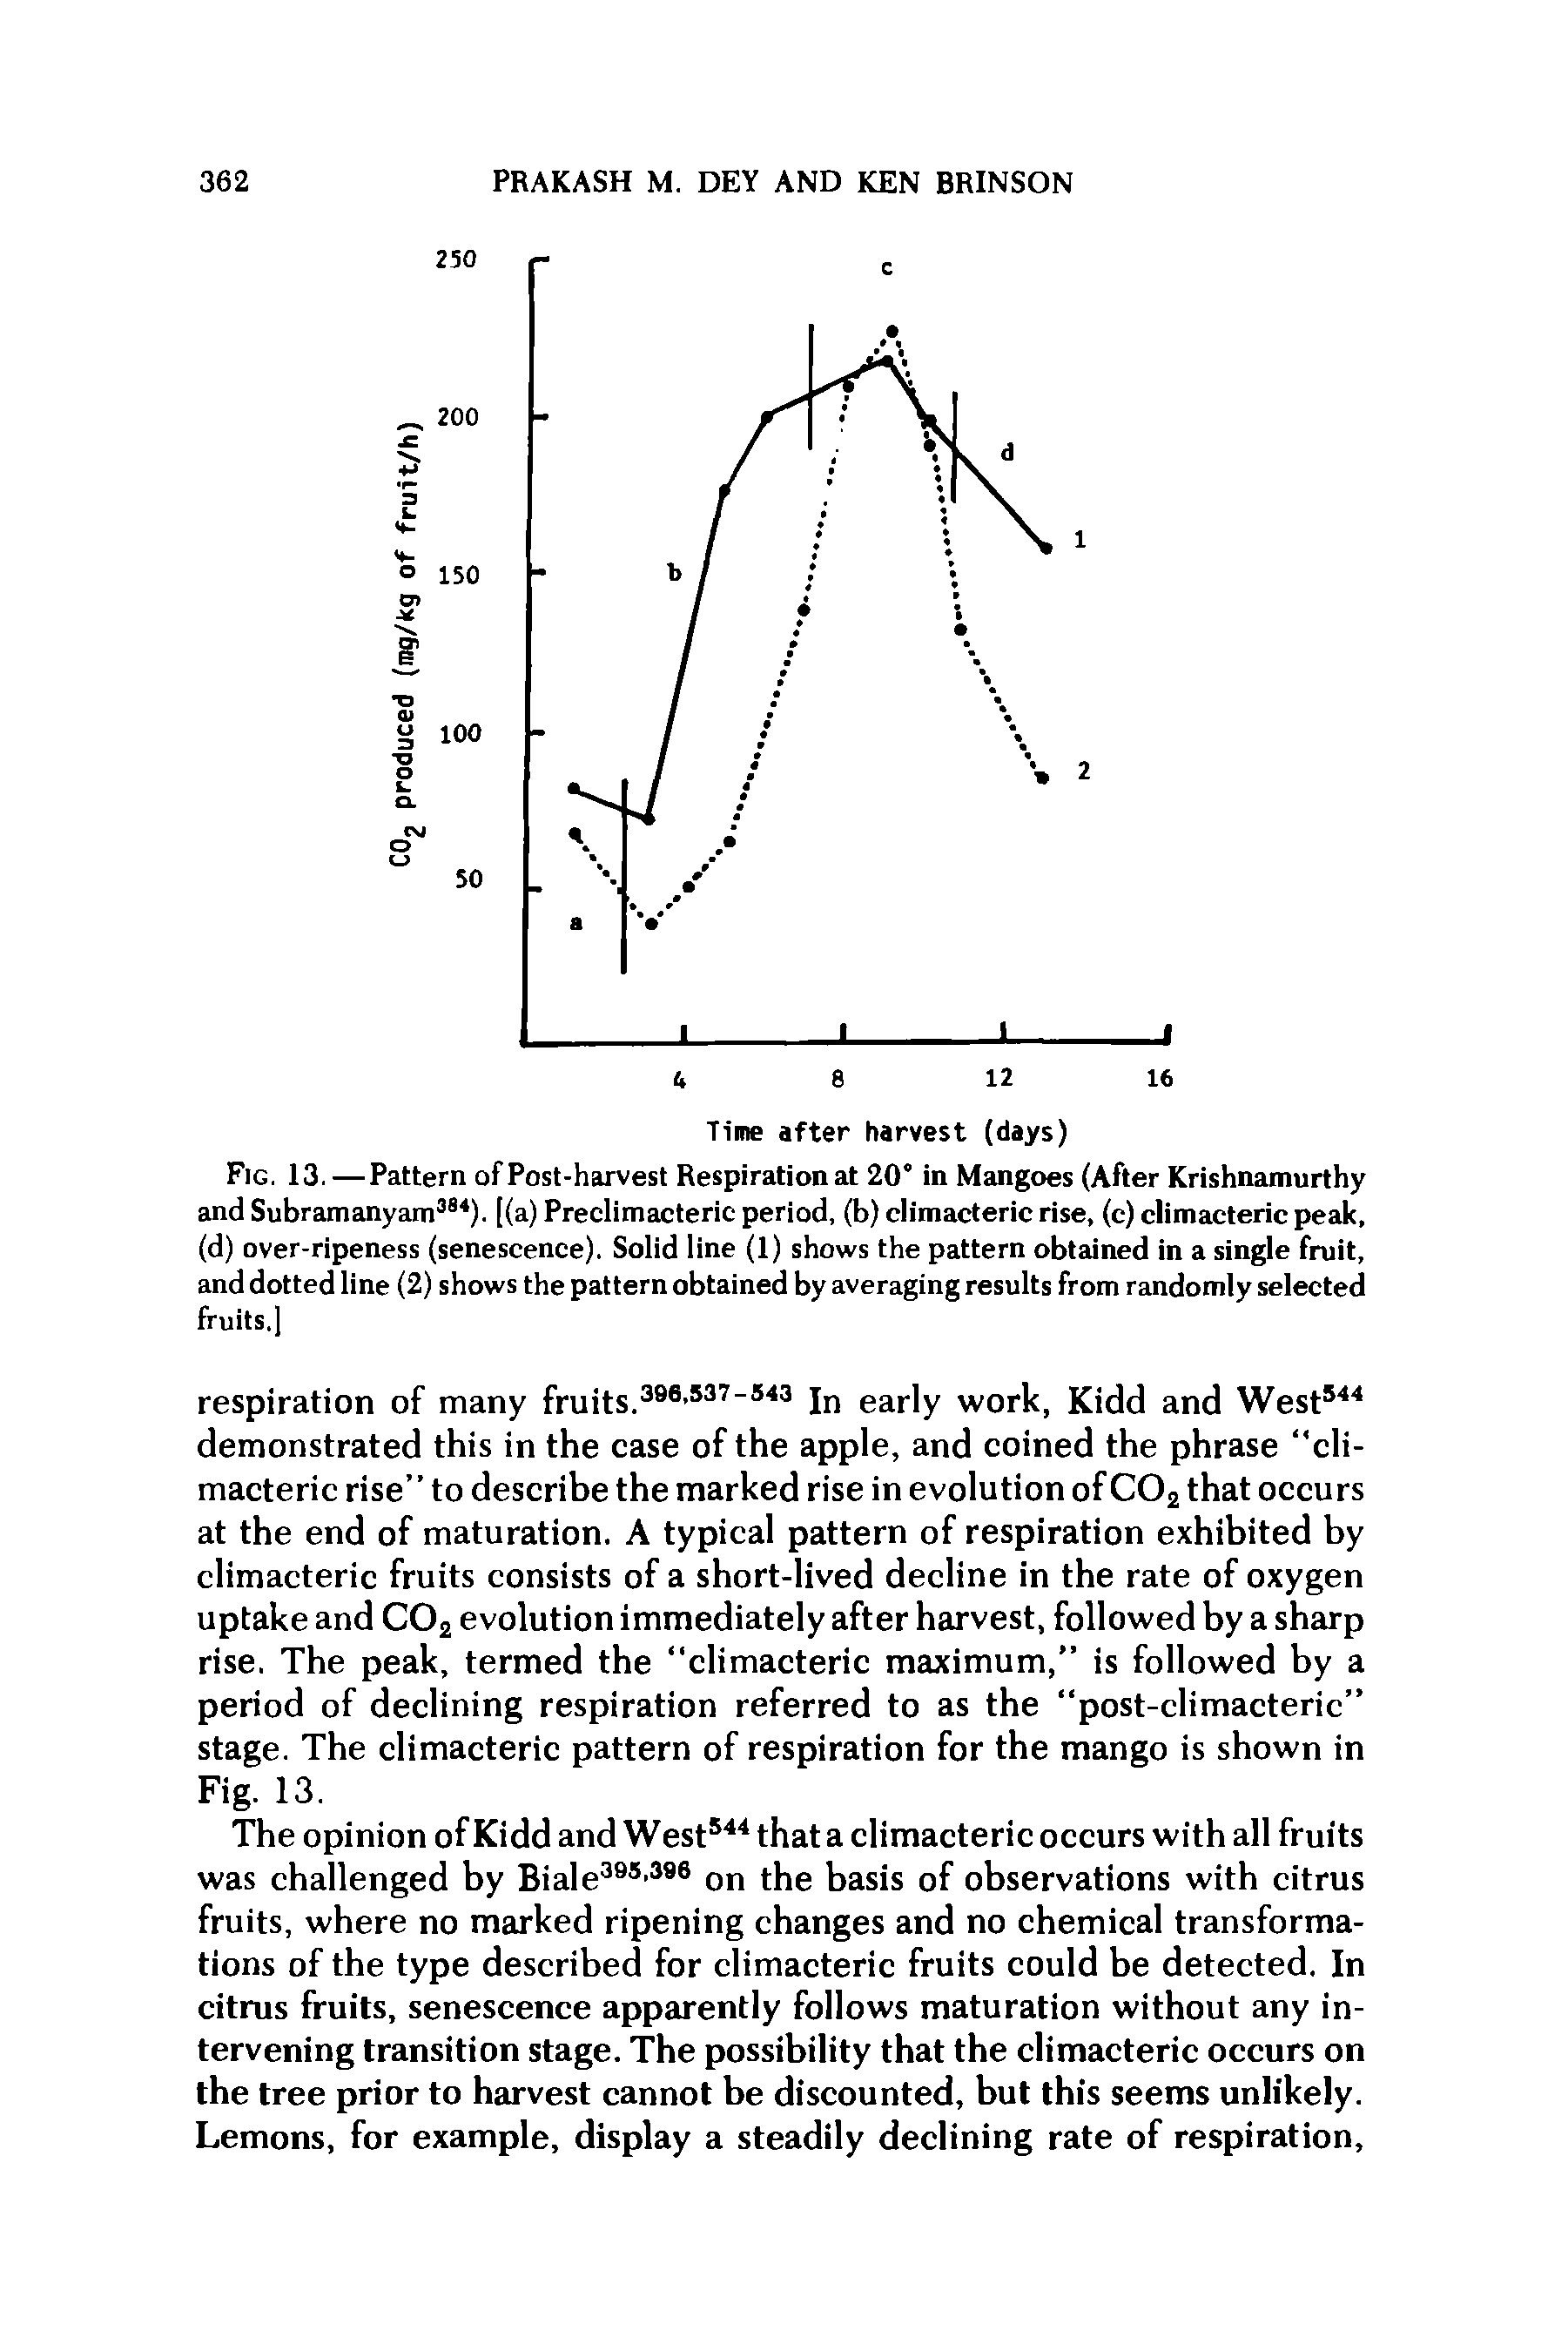 Fig. 13.—Pattern of Post-harvest Respiration at 20 in Mangoes (After Krishnamurthy and Subramanyam384). [(a) Preclimacteric period, (b) climacteric rise, (c) climacteric peak, (d) over-ripeness (senescence). Solid line (1) shows the pattern obtained in a single fruit, and dotted line (2) shows the pattern obtained by averaging results from randomly selected fruits.]...